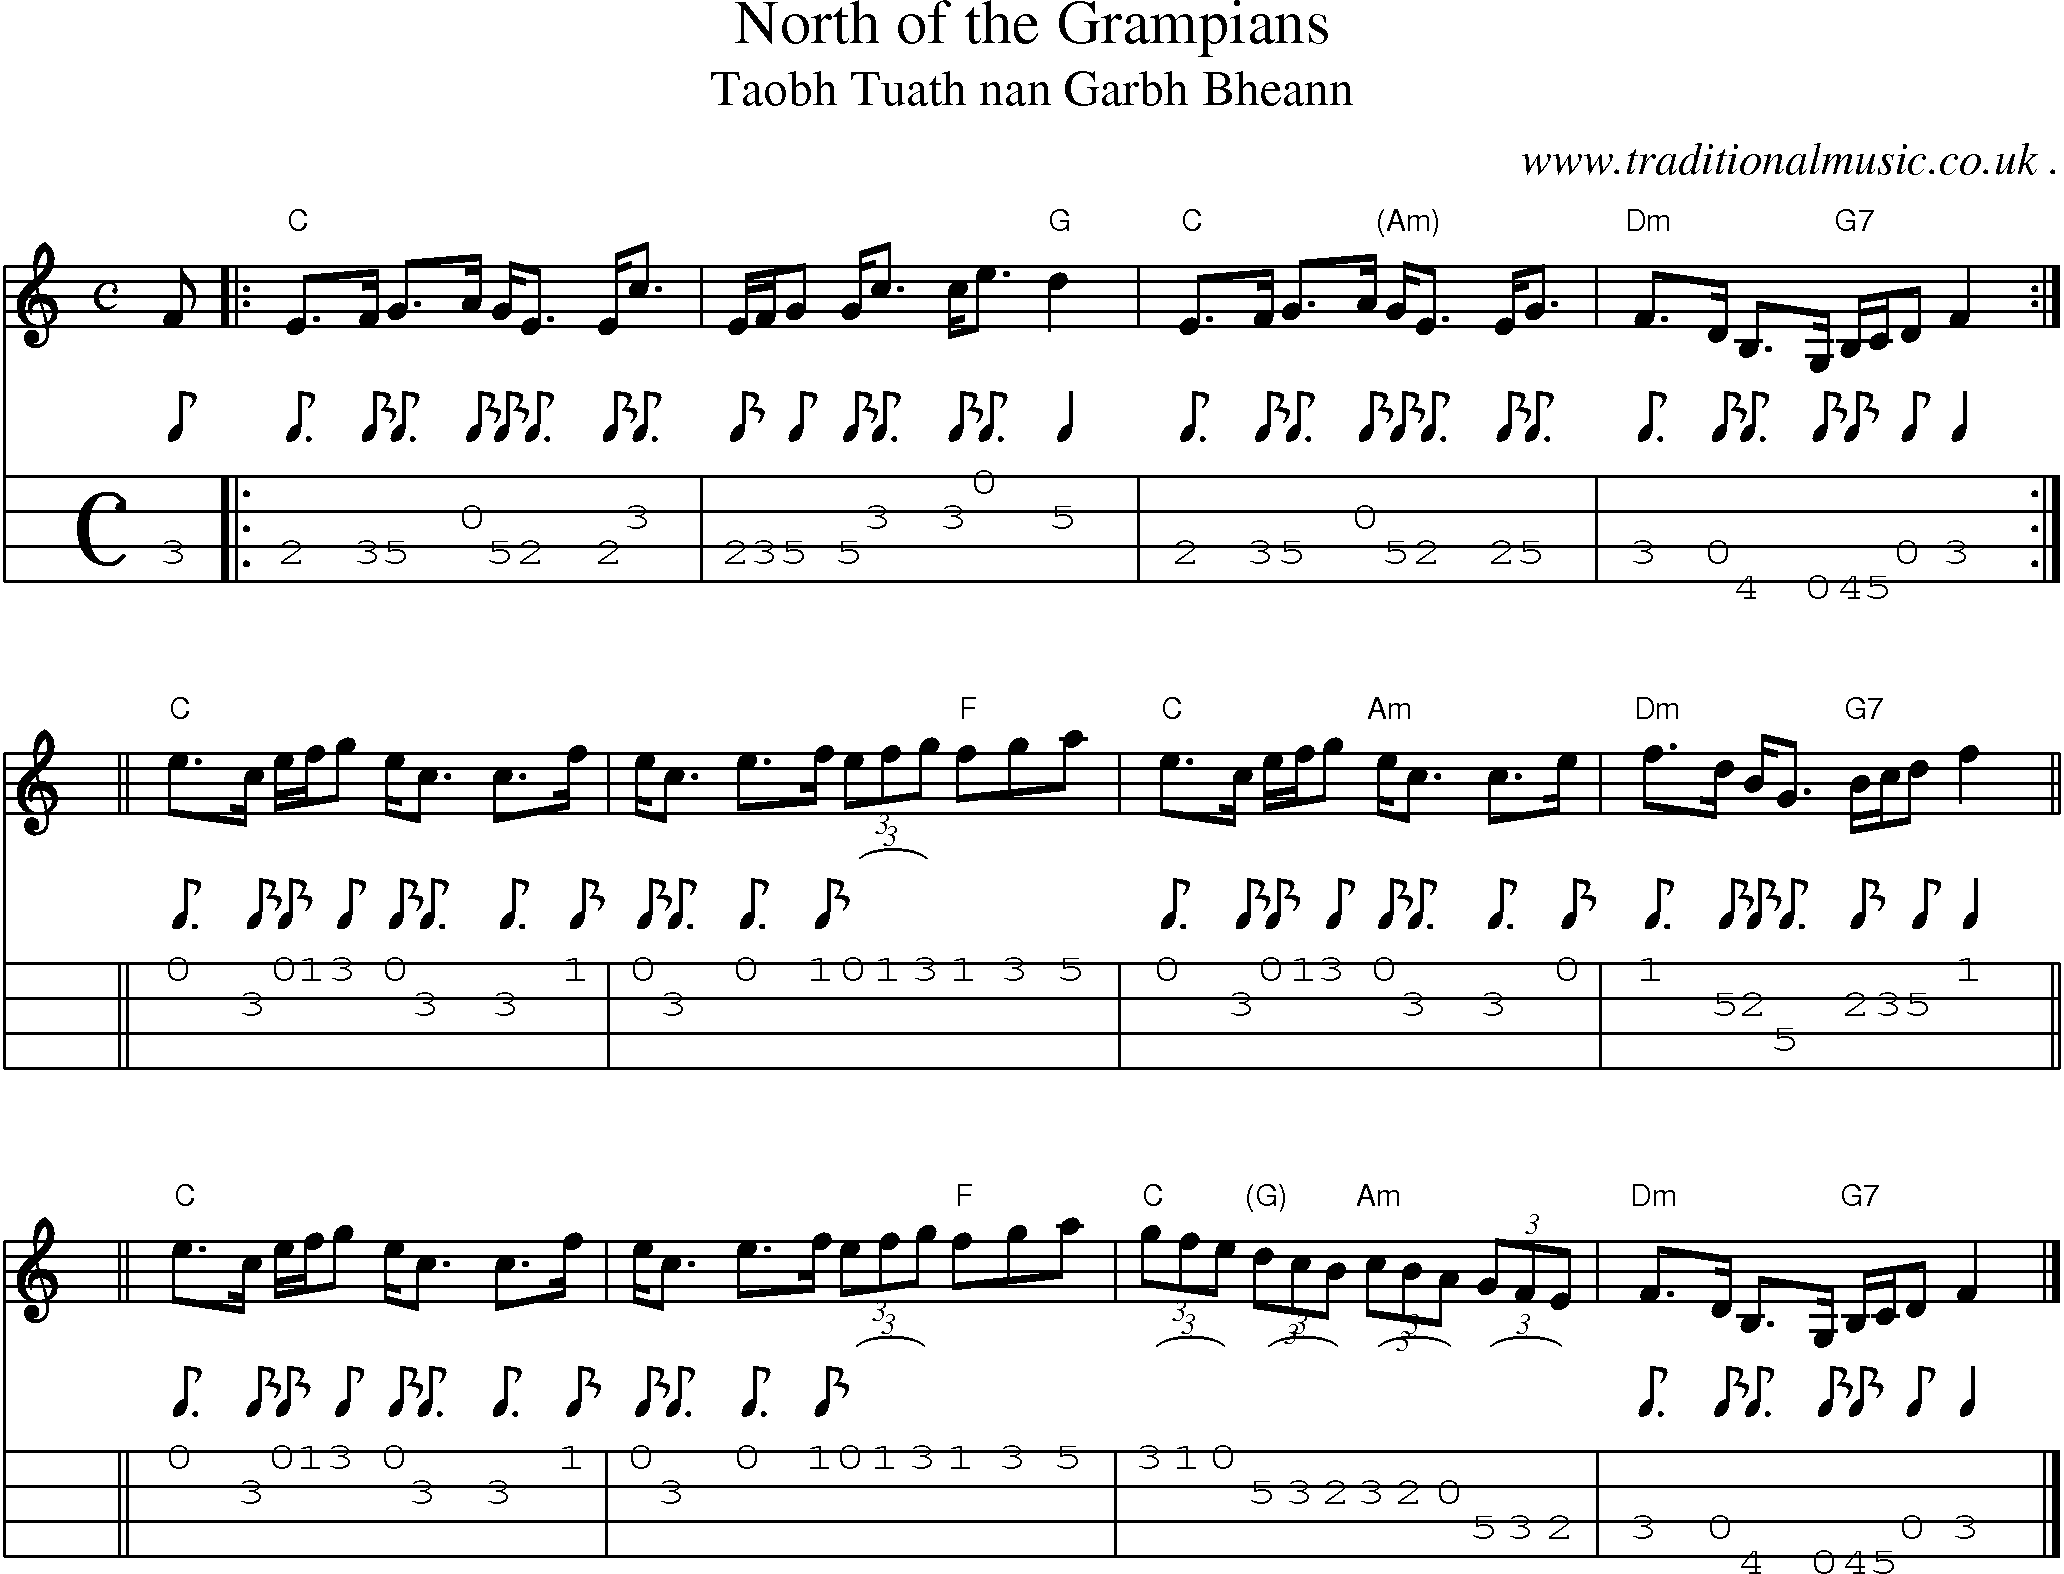 Sheet-music  score, Chords and Mandolin Tabs for North Of The Grampians